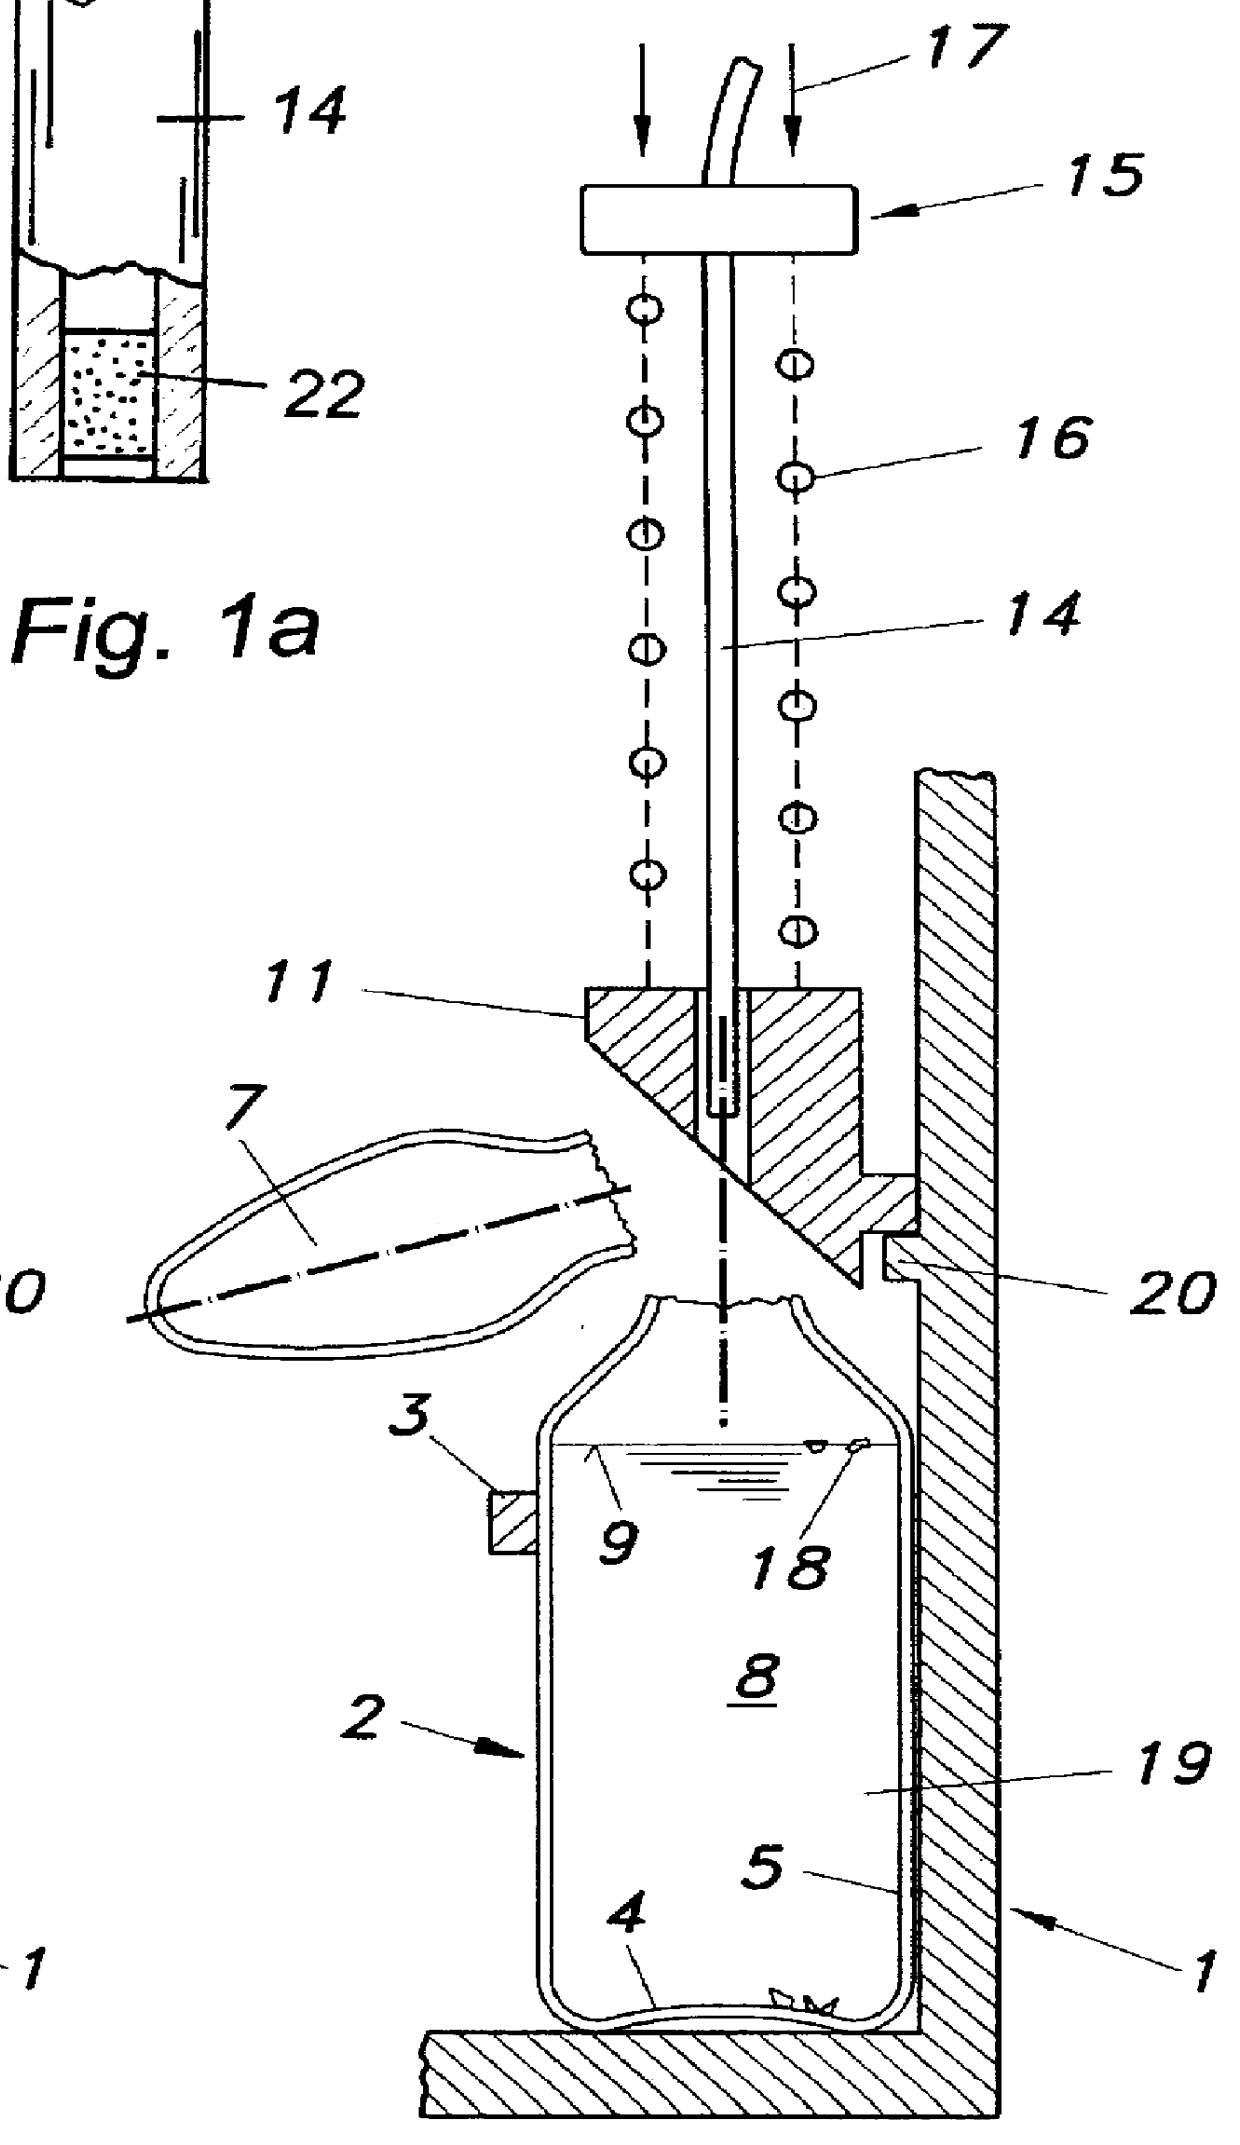 Device for withdrawing a liquid from a sealed glass ampoule